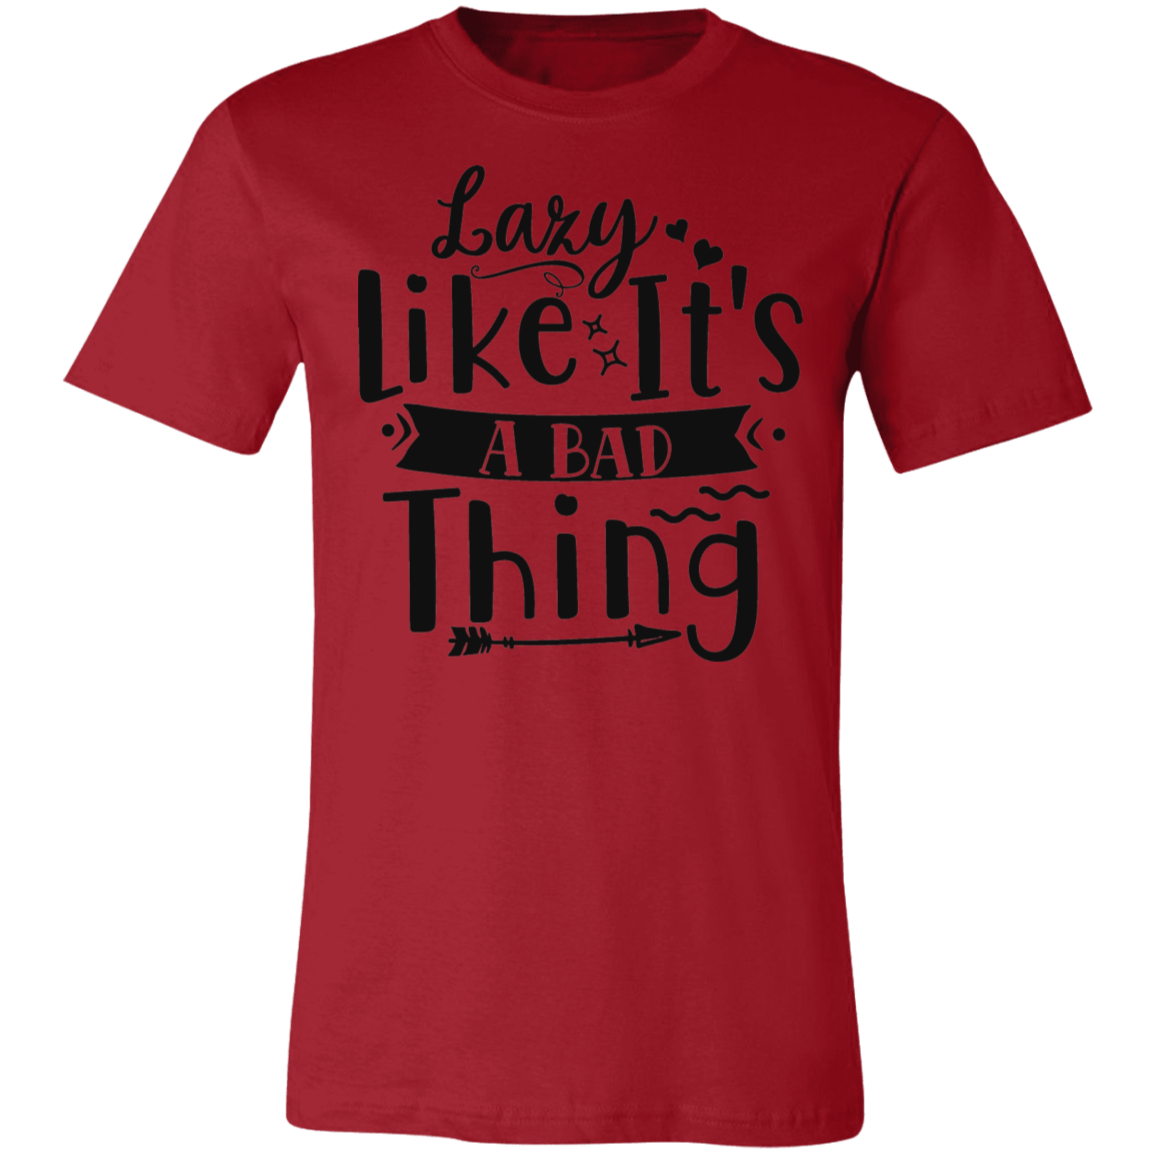 Lazy Like It's A Bad Thing Tee